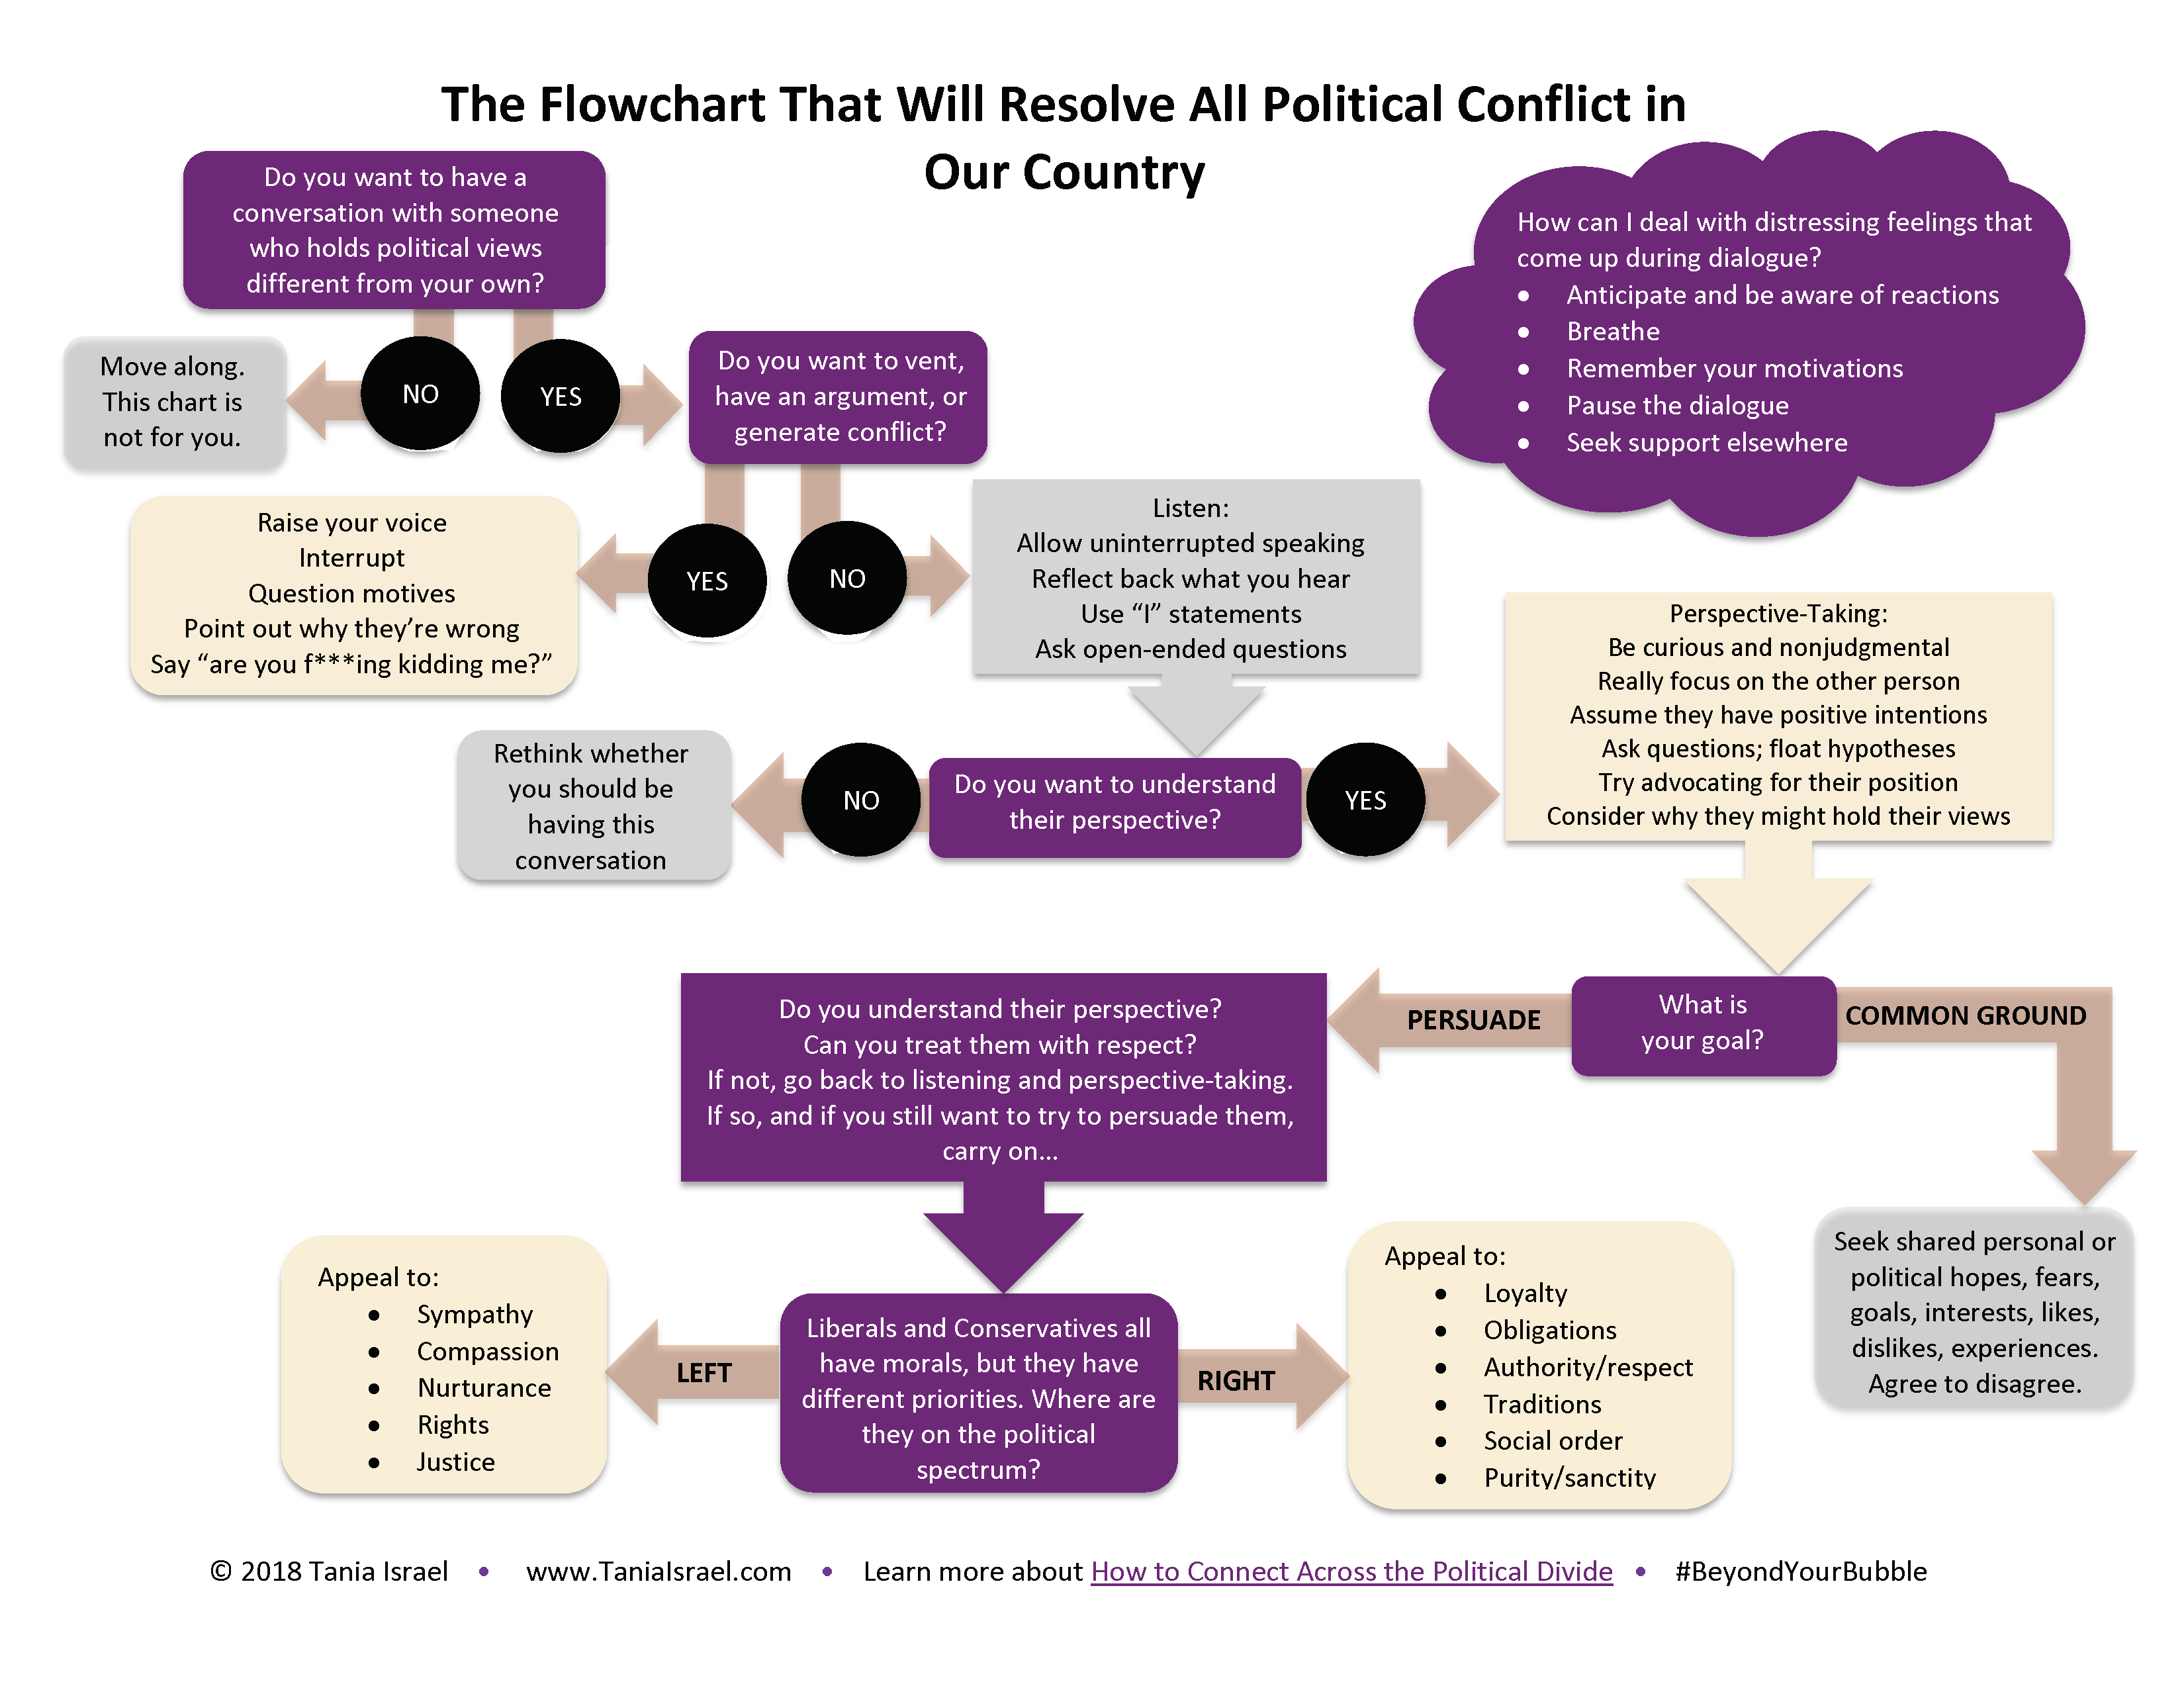 The Flowchart That Will Resolve All Political Conflict In Our Country